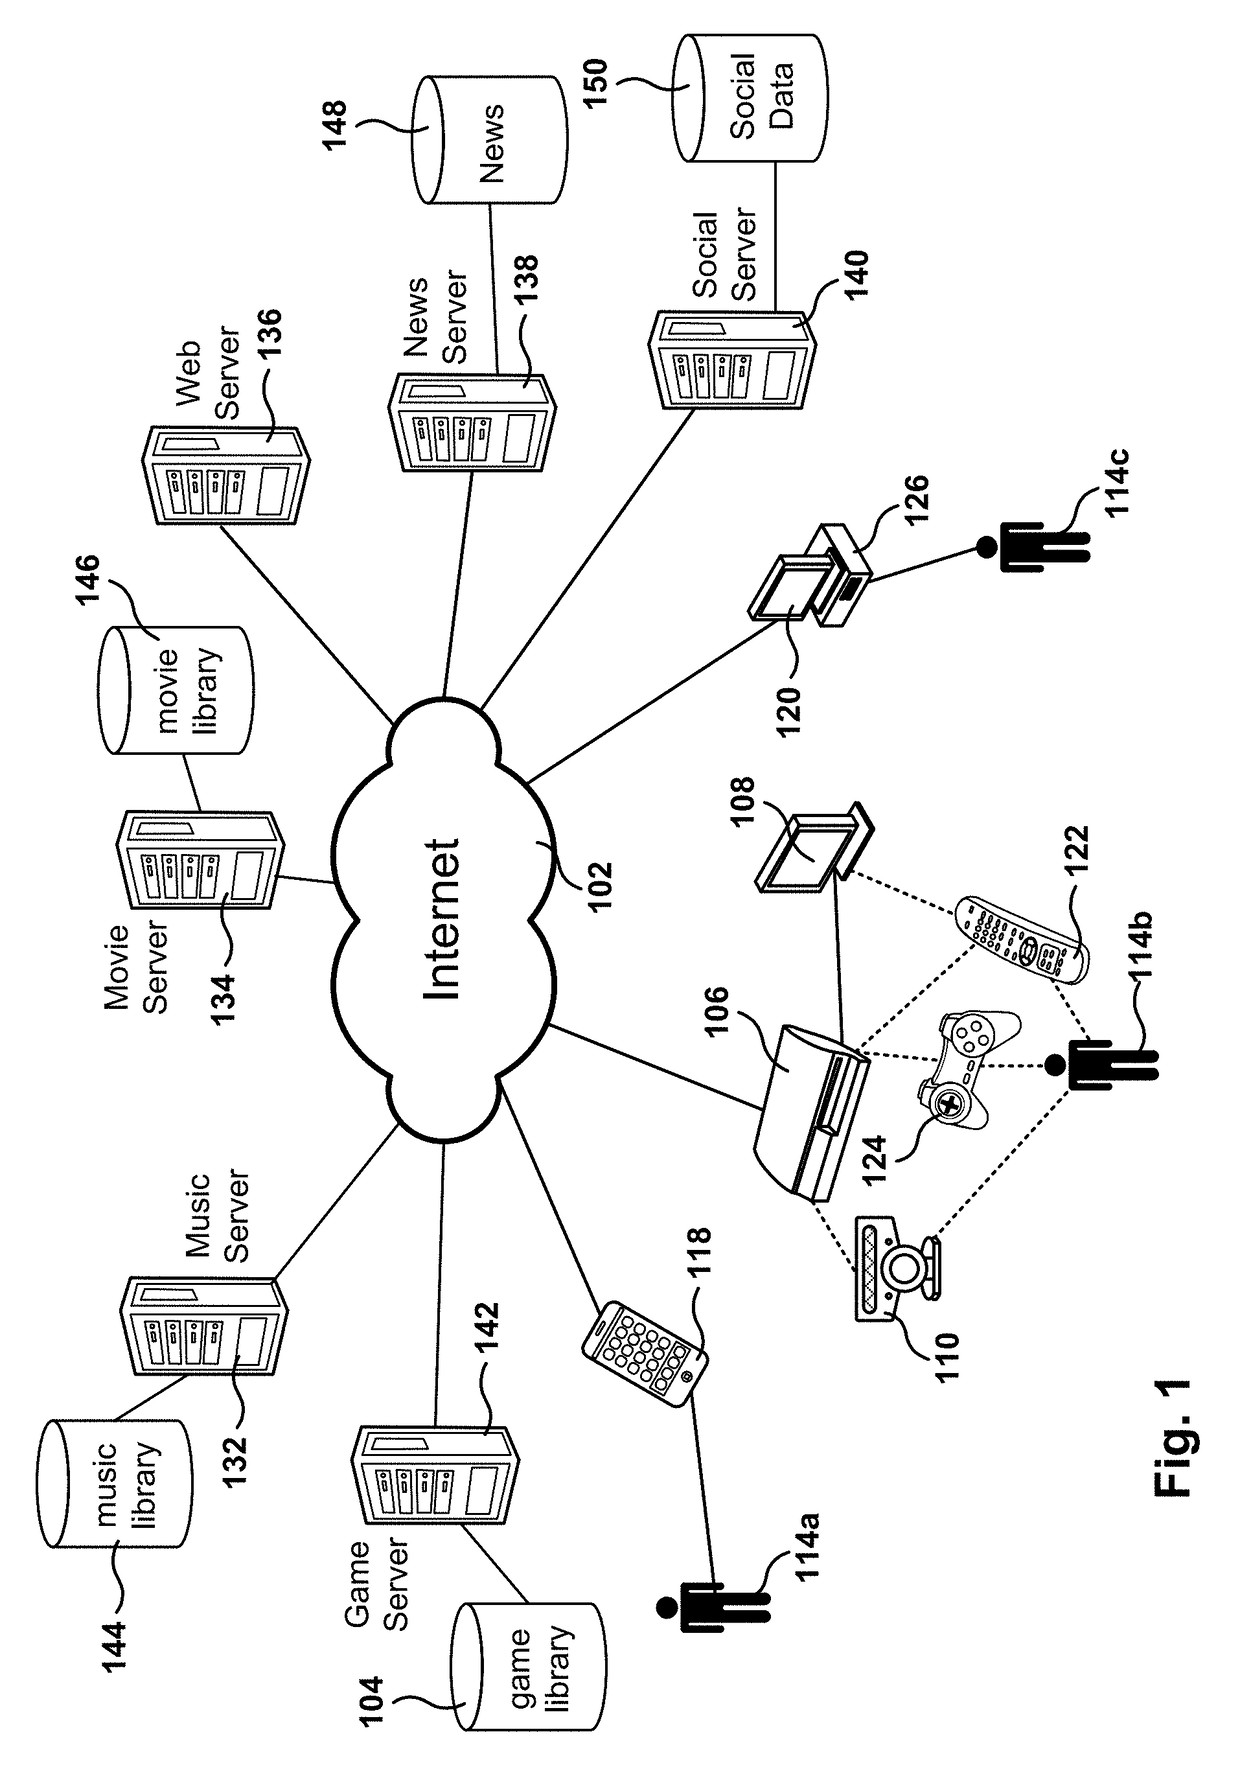 Dynamic denial of service detection and automated safe mitigation